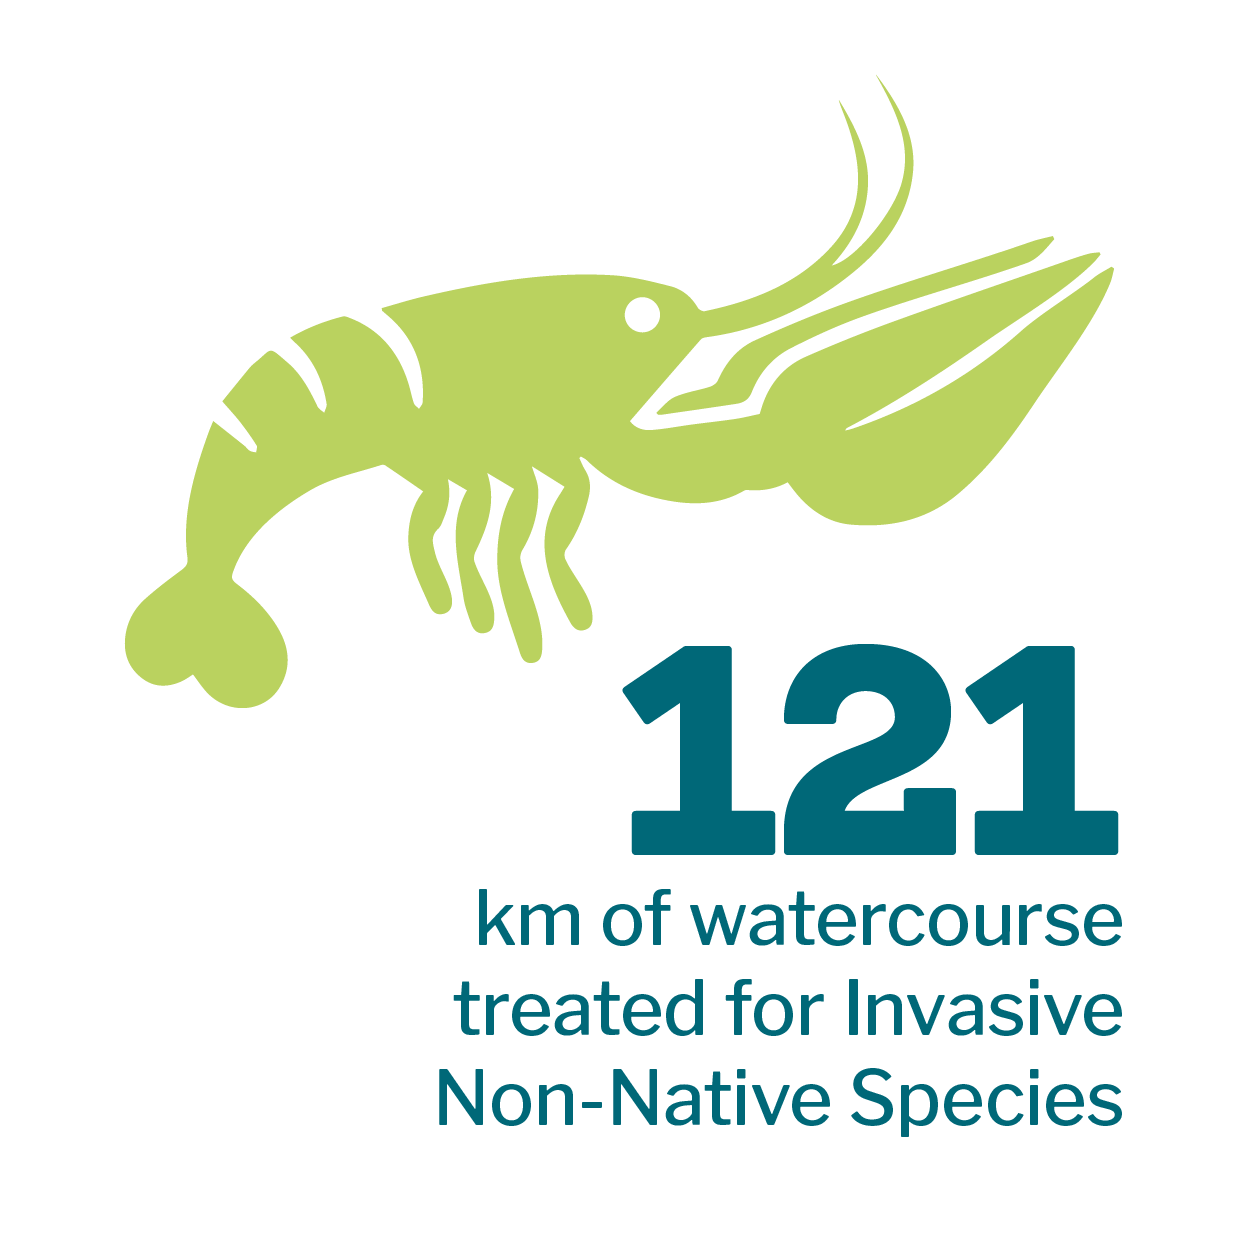 Invasive species icon that reads: 121.41 km of watercourse treated for Invasive Non-Native Species